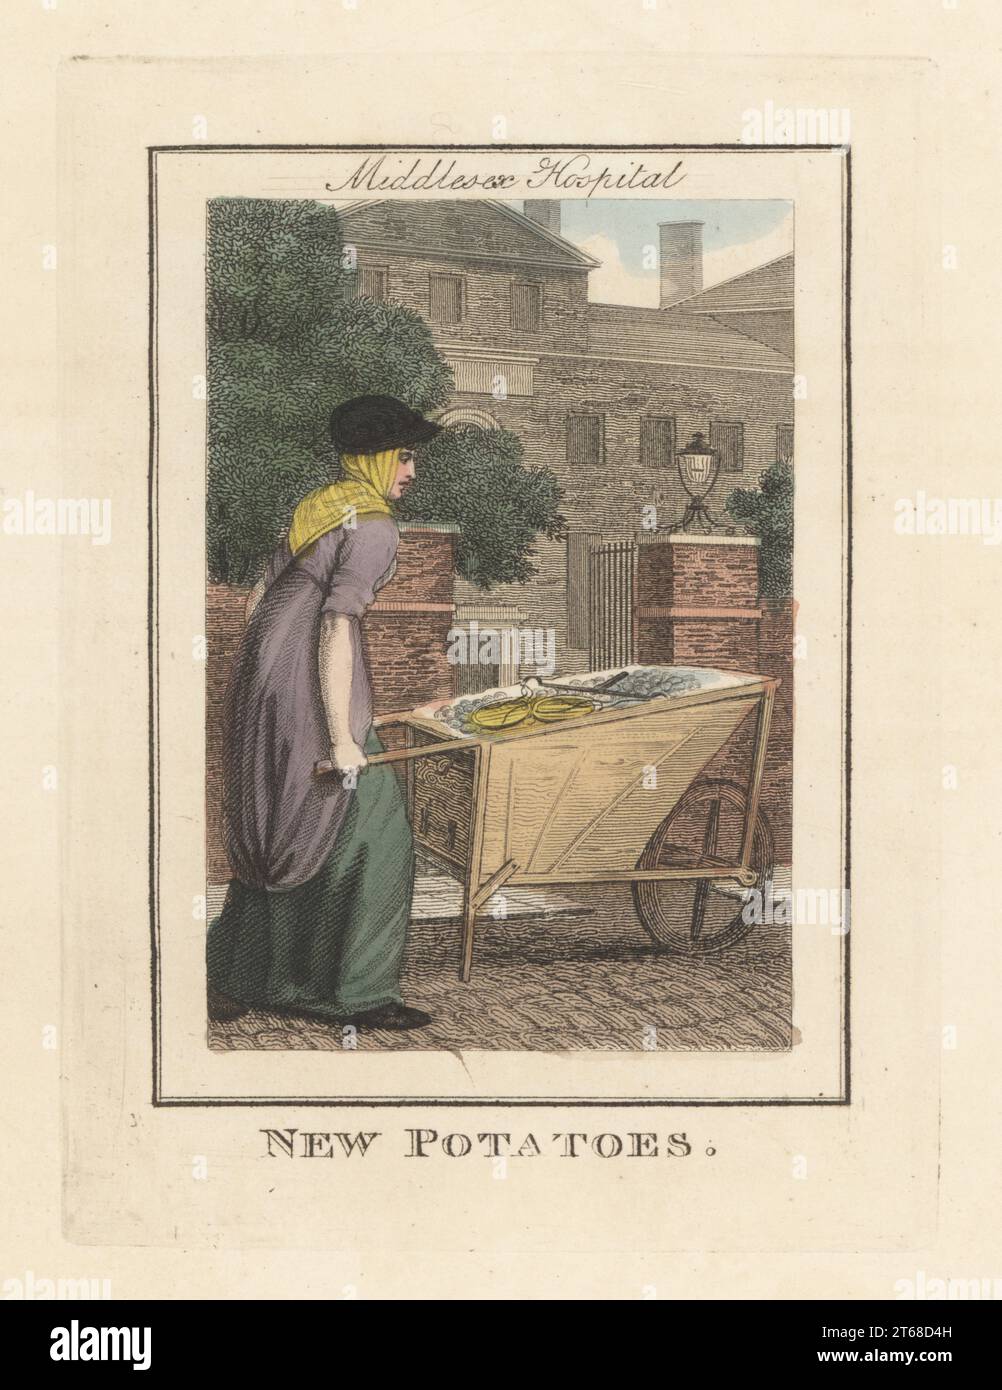 Woman selling new potatoes at Middlesex Hospital. In bonnet, fichu, dress and petticoats with wheelbarrow of potatoes. Gate and gardens of Middlesex Hospital, built in 1755 and demolished in 2017. Handcoloured copperplate engraving by Edward Edwards after an illustration by William Marshall Craig from Description of the Plates Representing the Itinerant Traders of London, Richard Phillips, No. 71 St Pauls Churchyard, London, 1805. Stock Photo